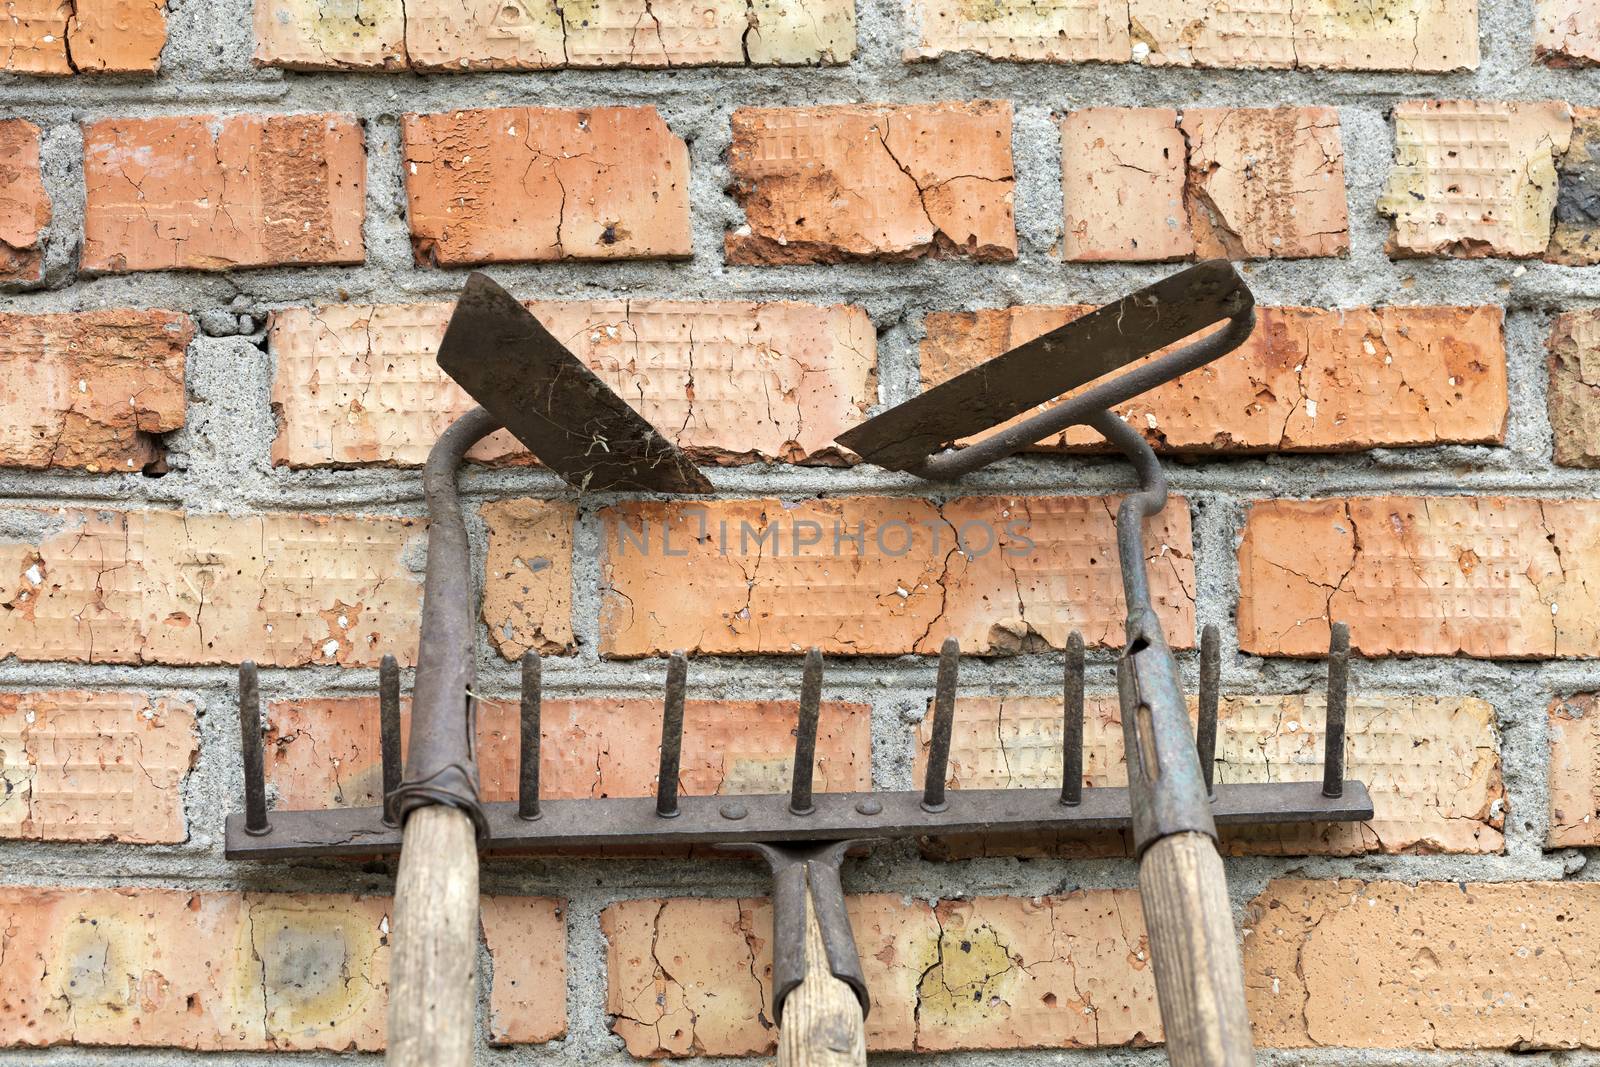 Still life of old / rusty, rake and hoe garden tools against the old weathered brick background making horizontal lines.